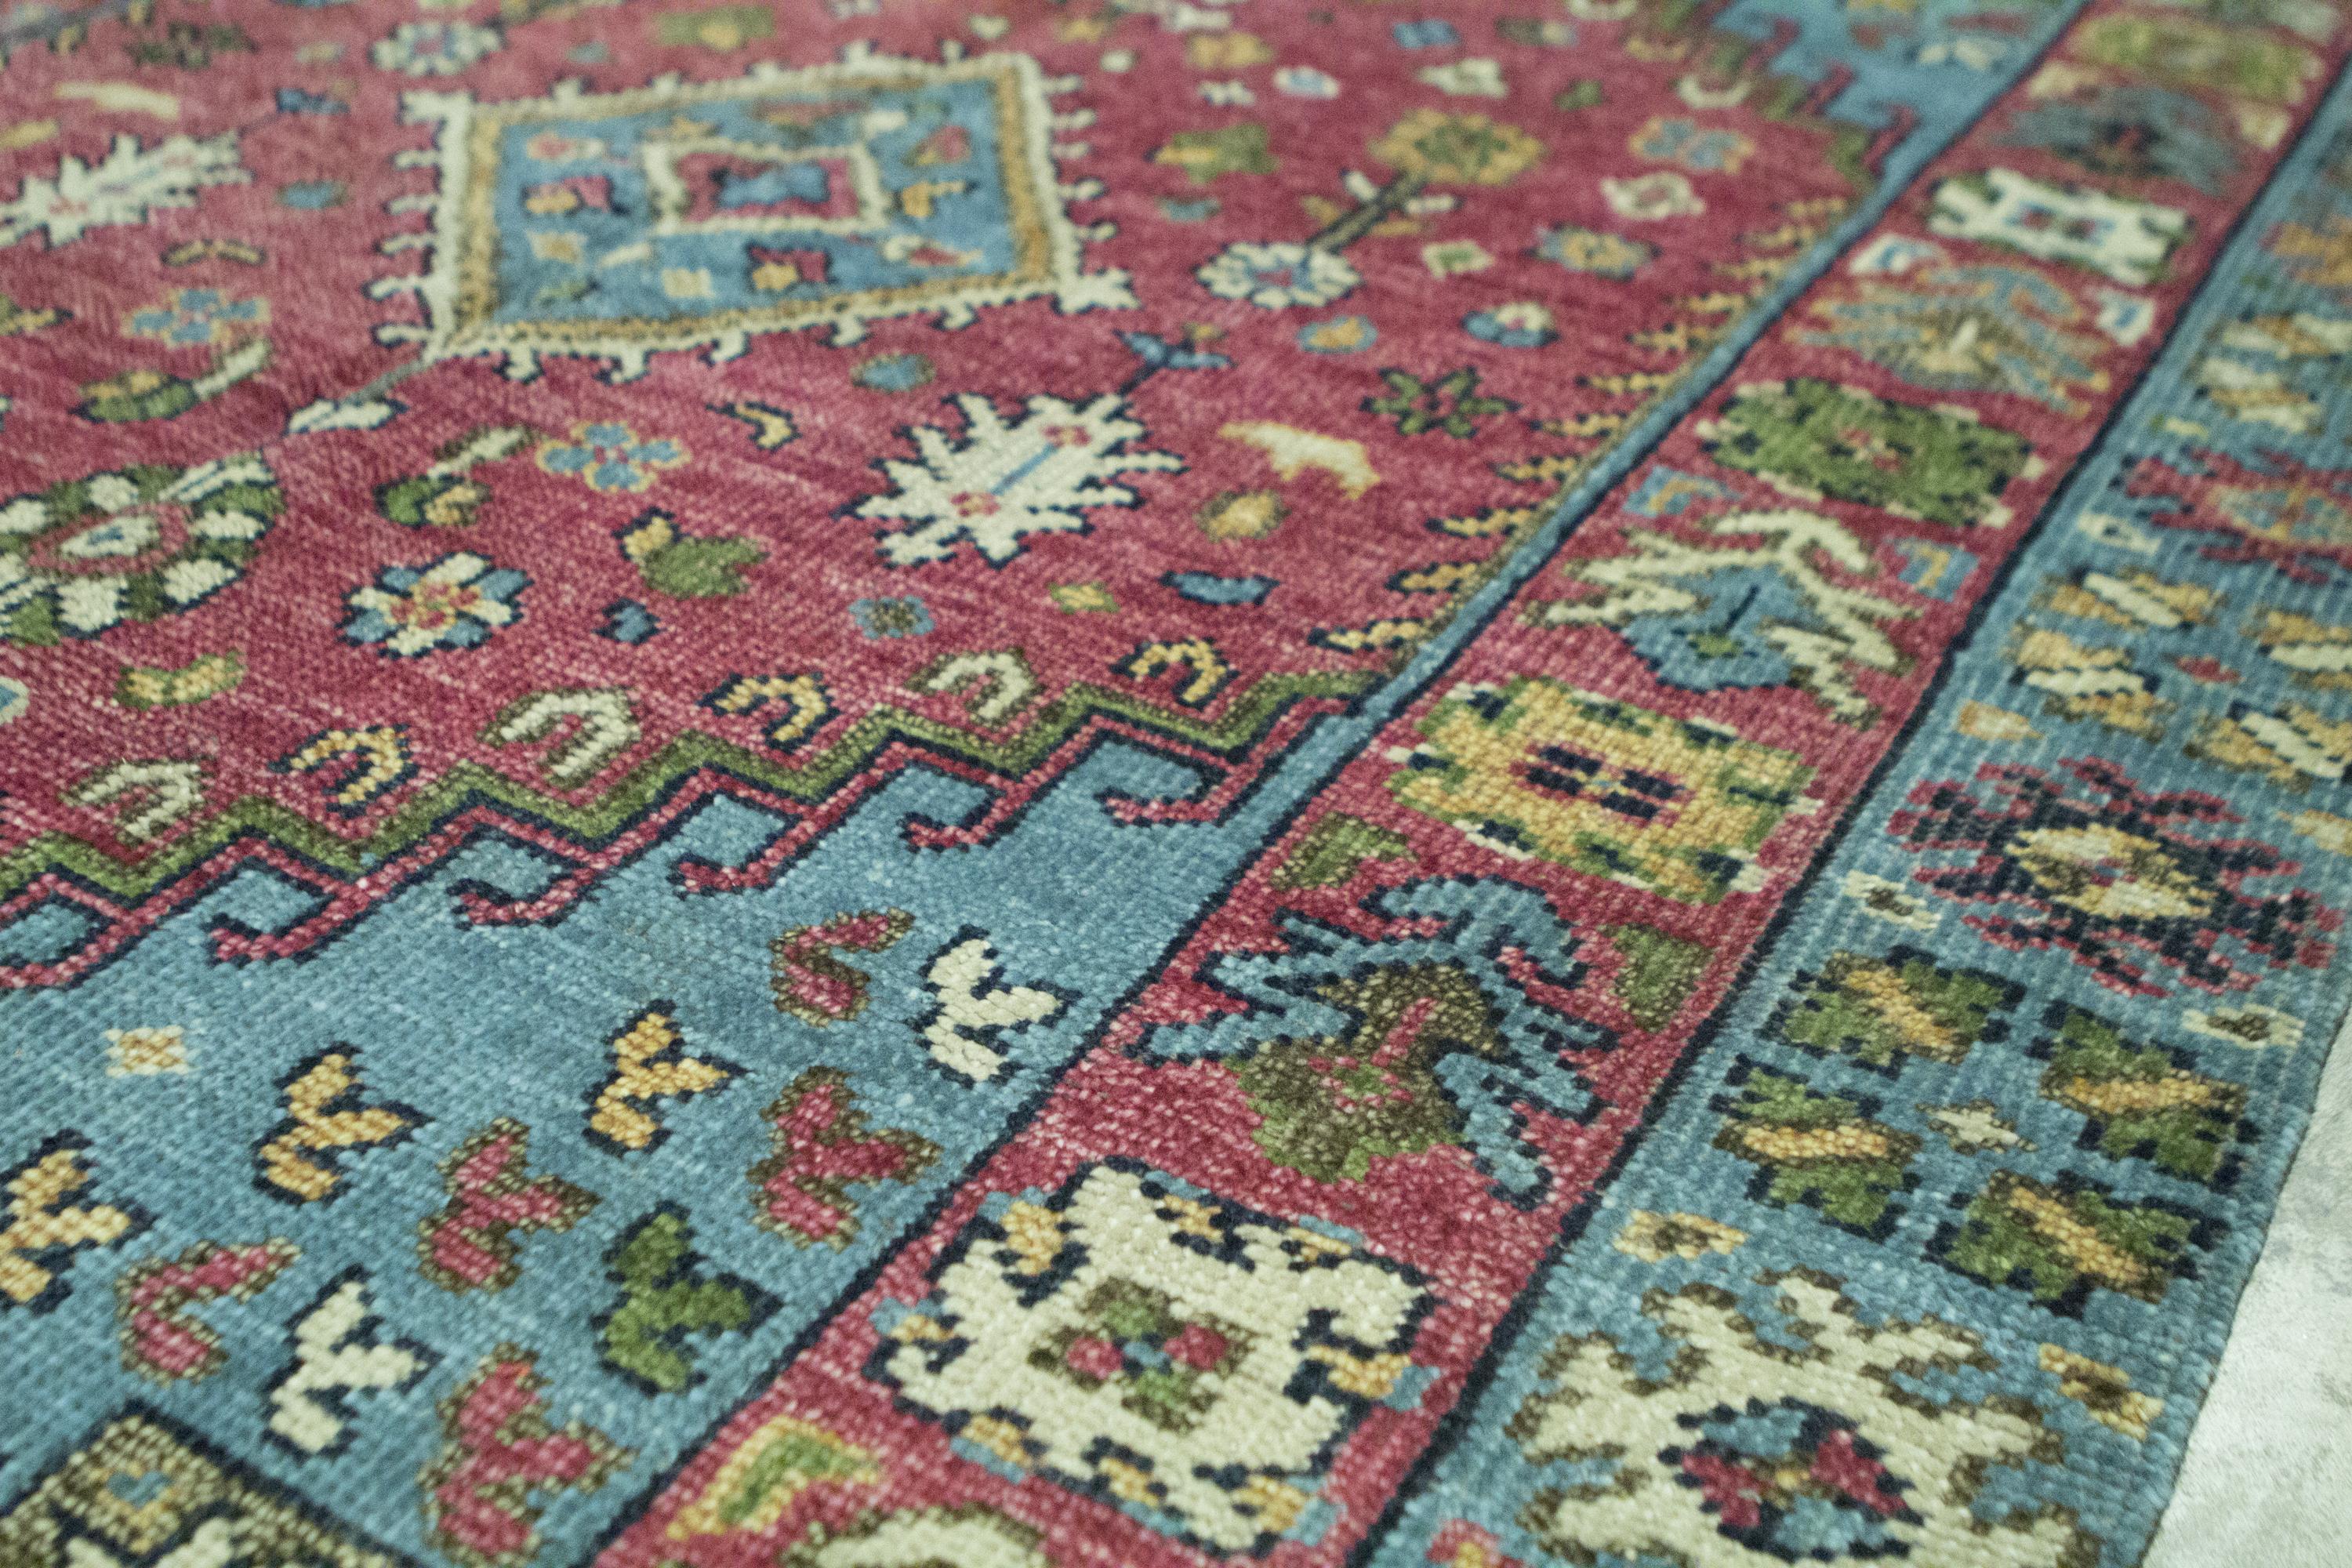 Bringing to life these Classic traditional Caucasian and Tribal designs. The timeless character and patterns of these rugs have been recreated using the finest of wools and are handwoven helping to create a sense of everlasting beauty. Measures: